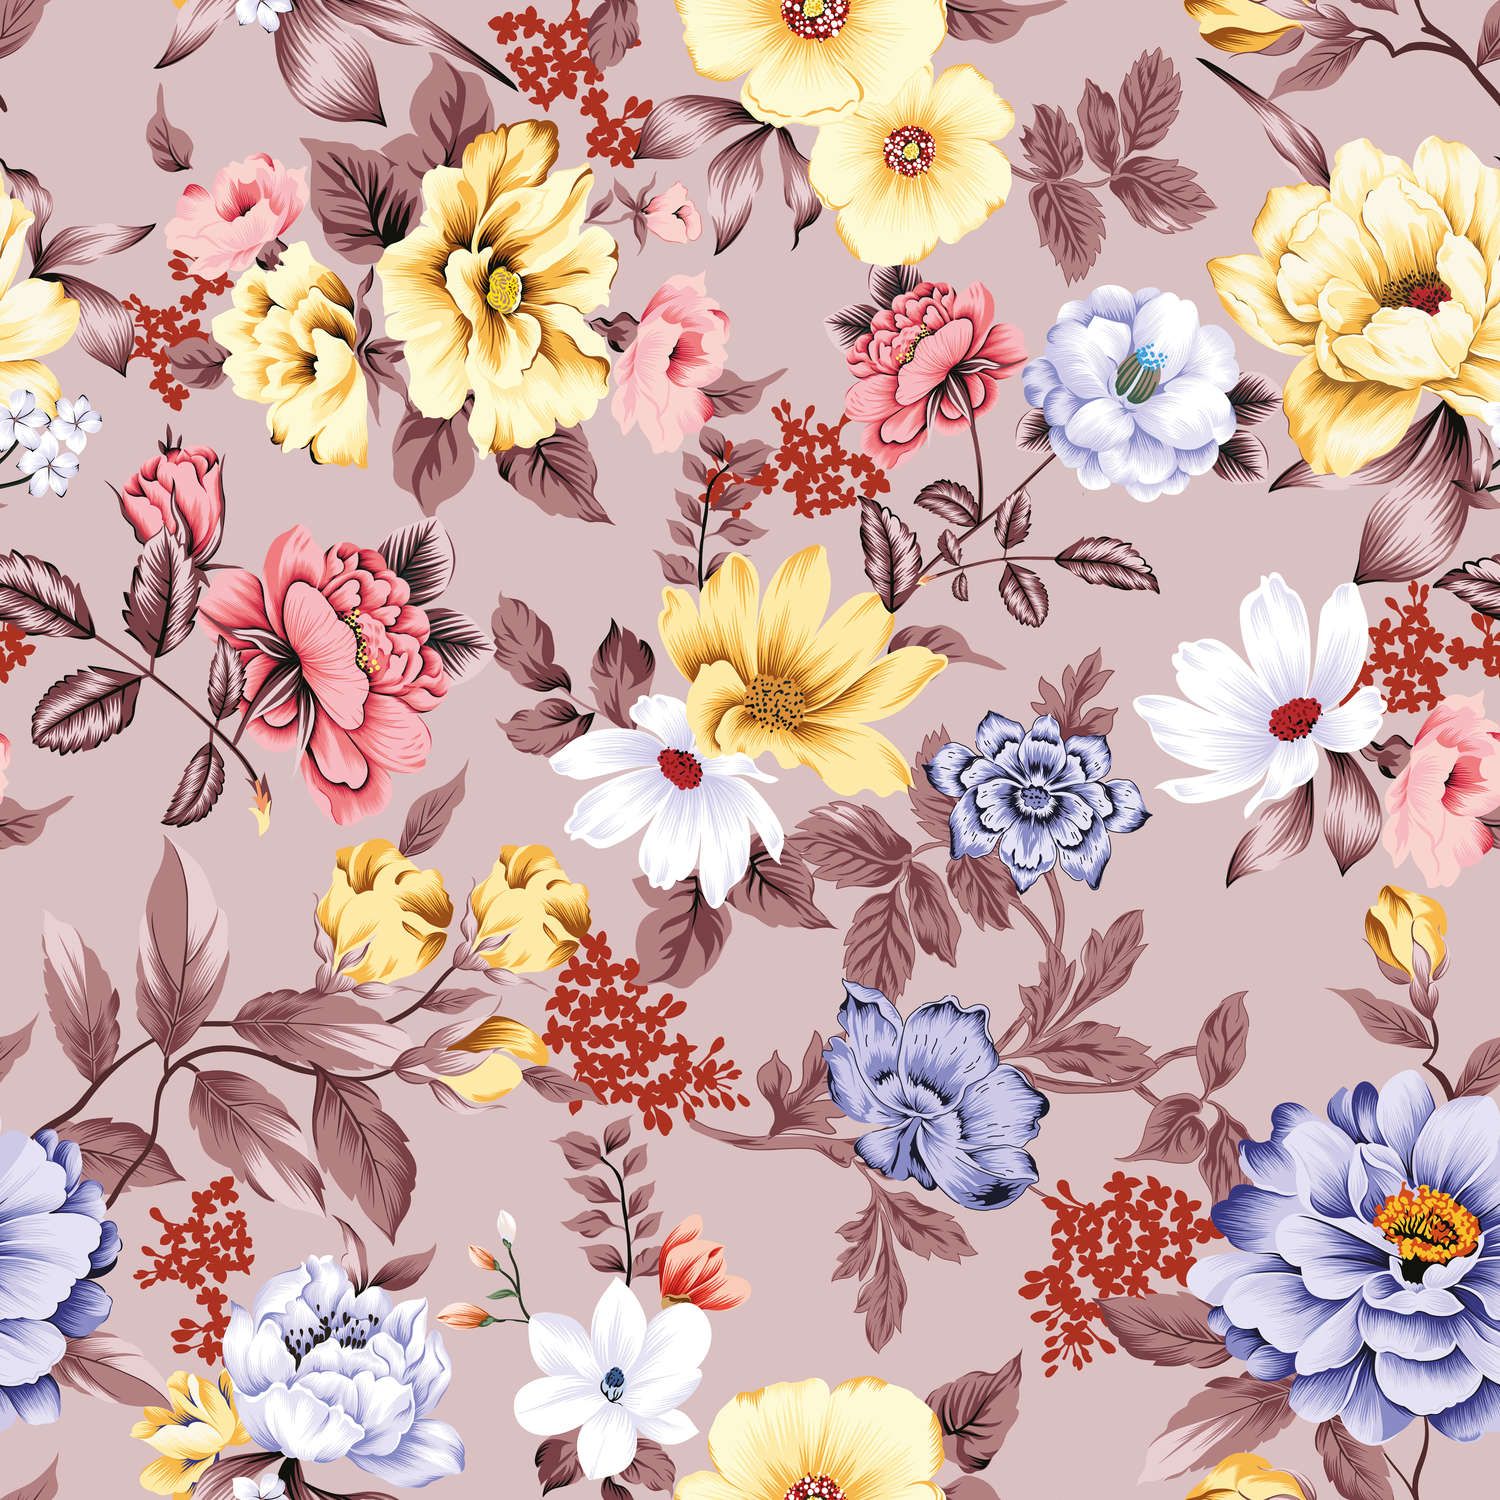             Photo wallpaper floral with flowers and leaves - Smooth & slightly shiny non-woven
        